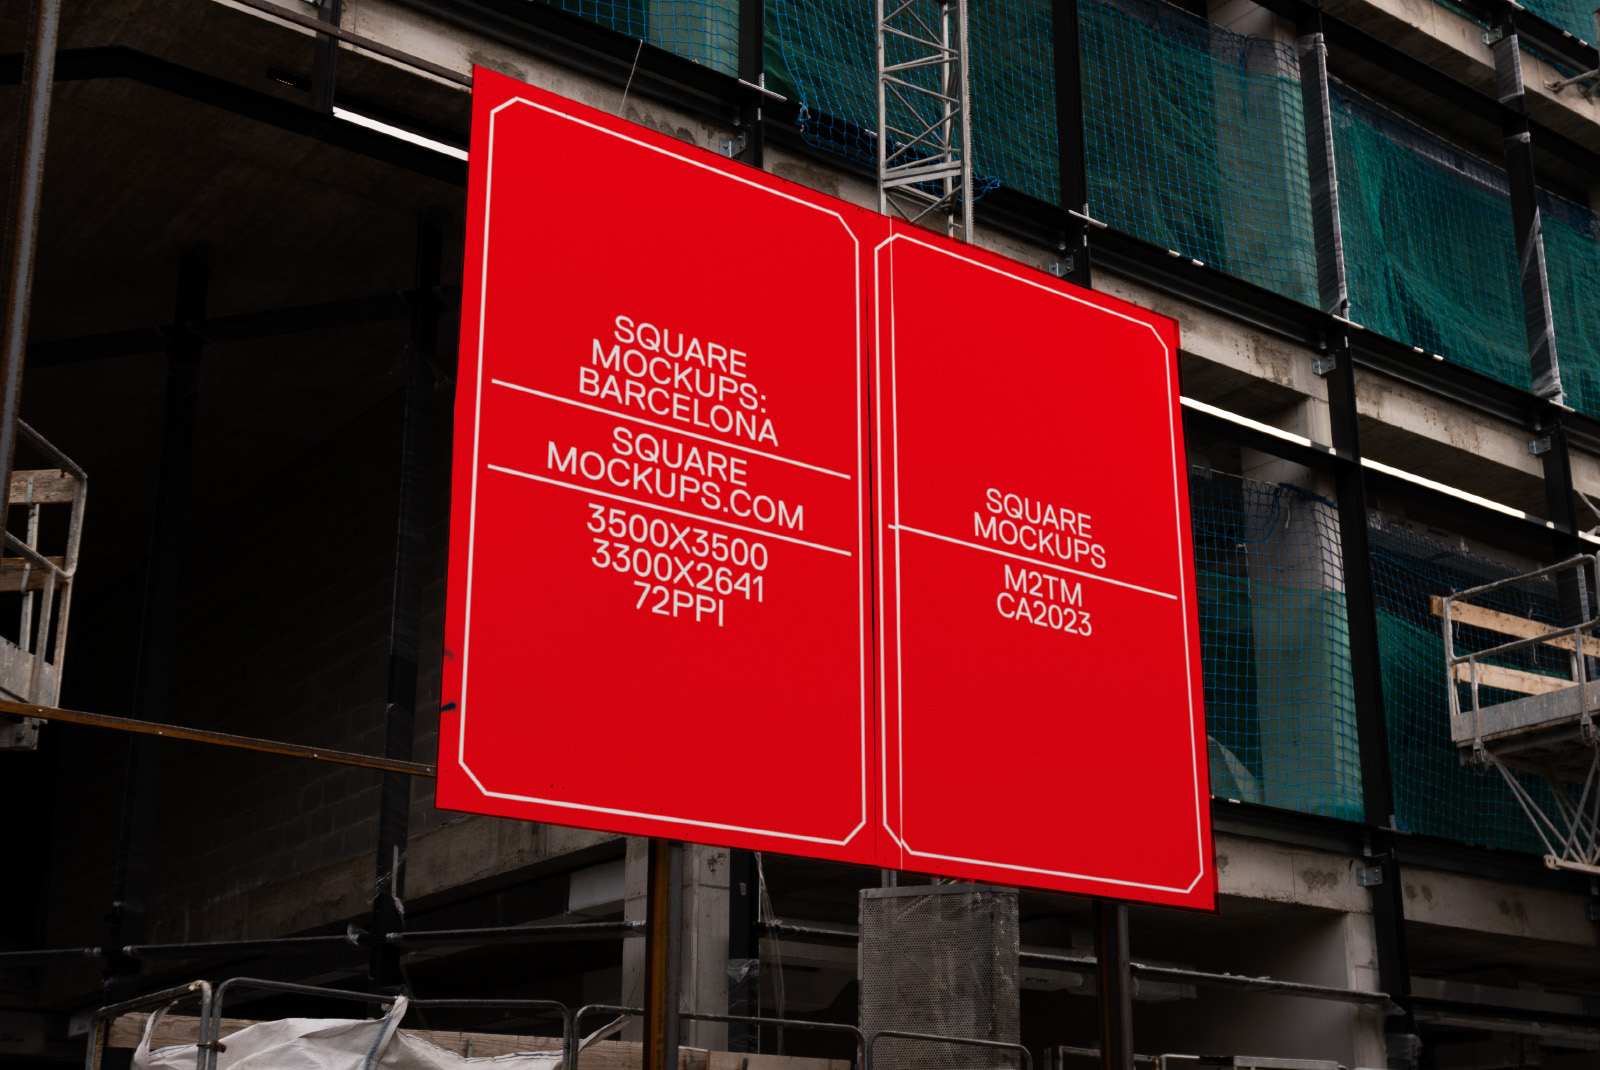 Outdoor billboard mockup in an urban construction setting, showing a pair of large red advertisements with sample text for designers.